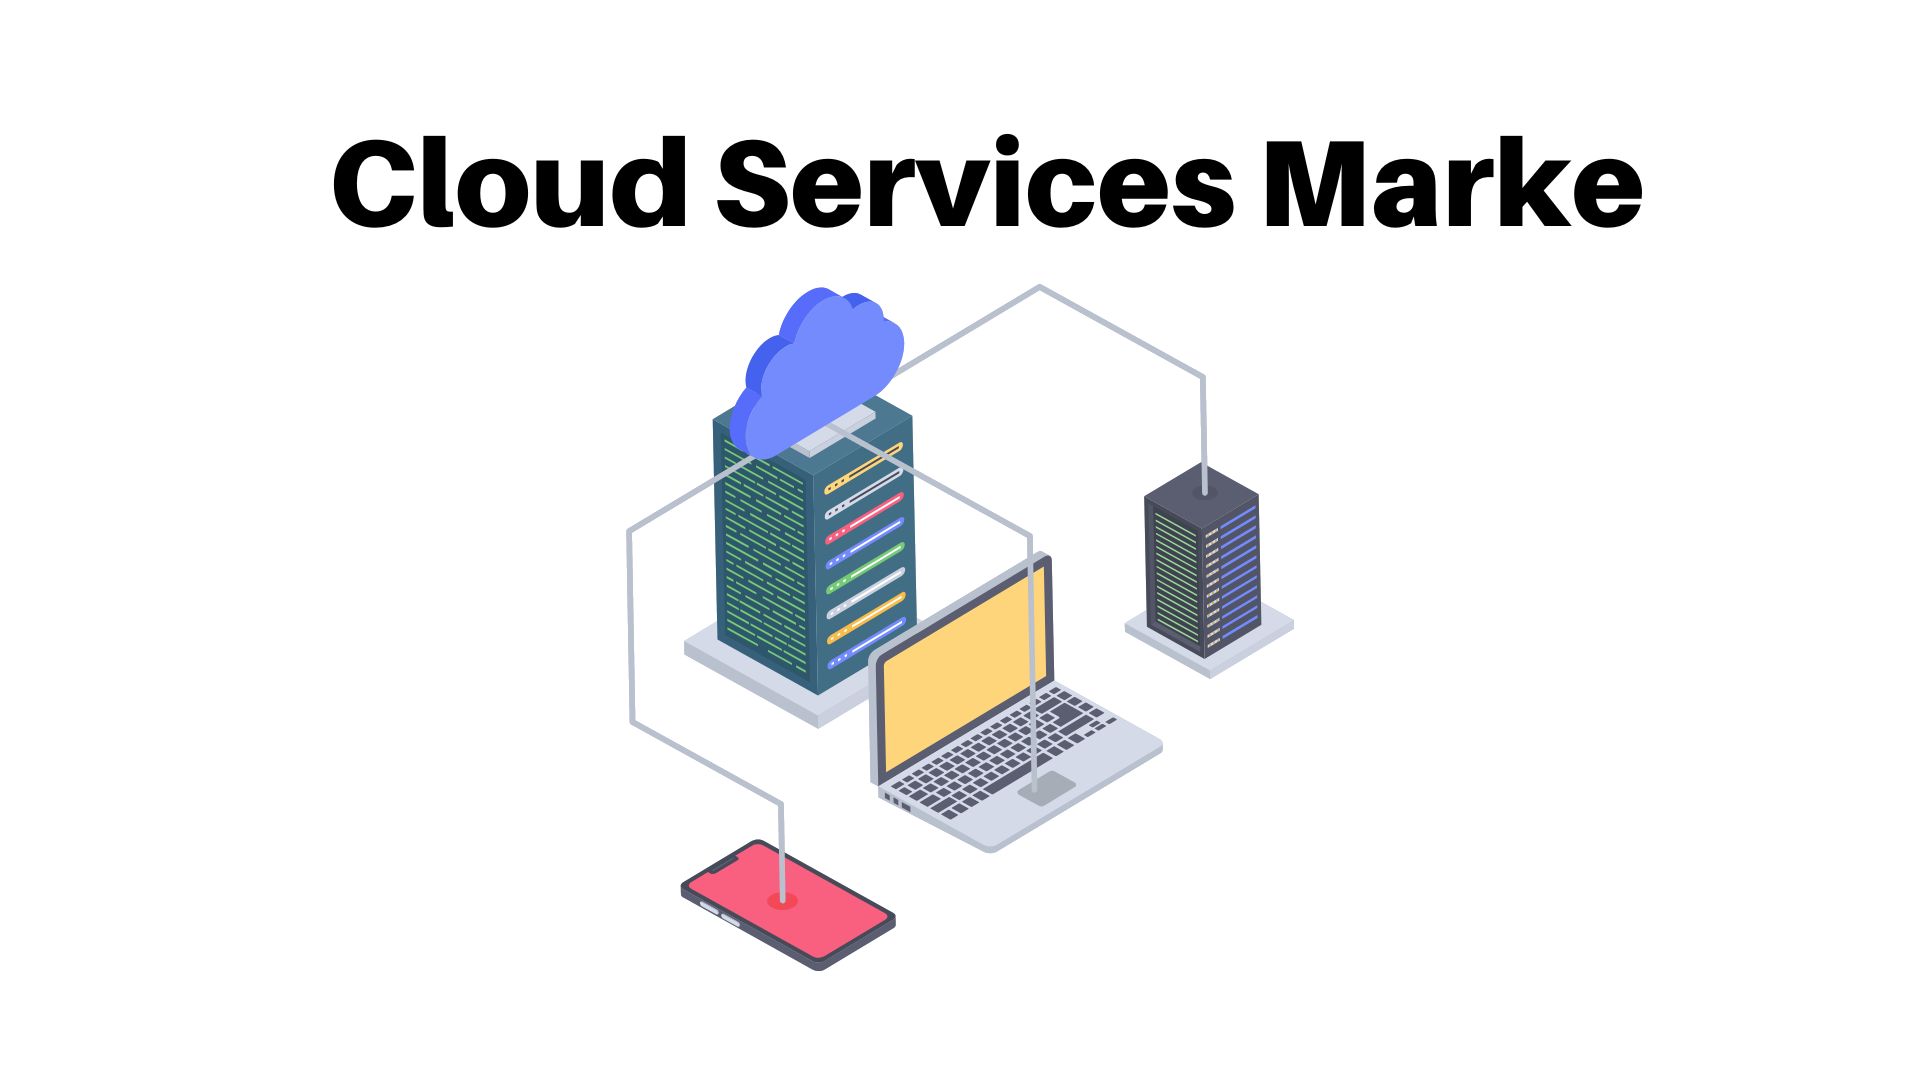 Cloud Services Market to Reach USD 1950.37 Billion by 2032, Says Market.us Research Study